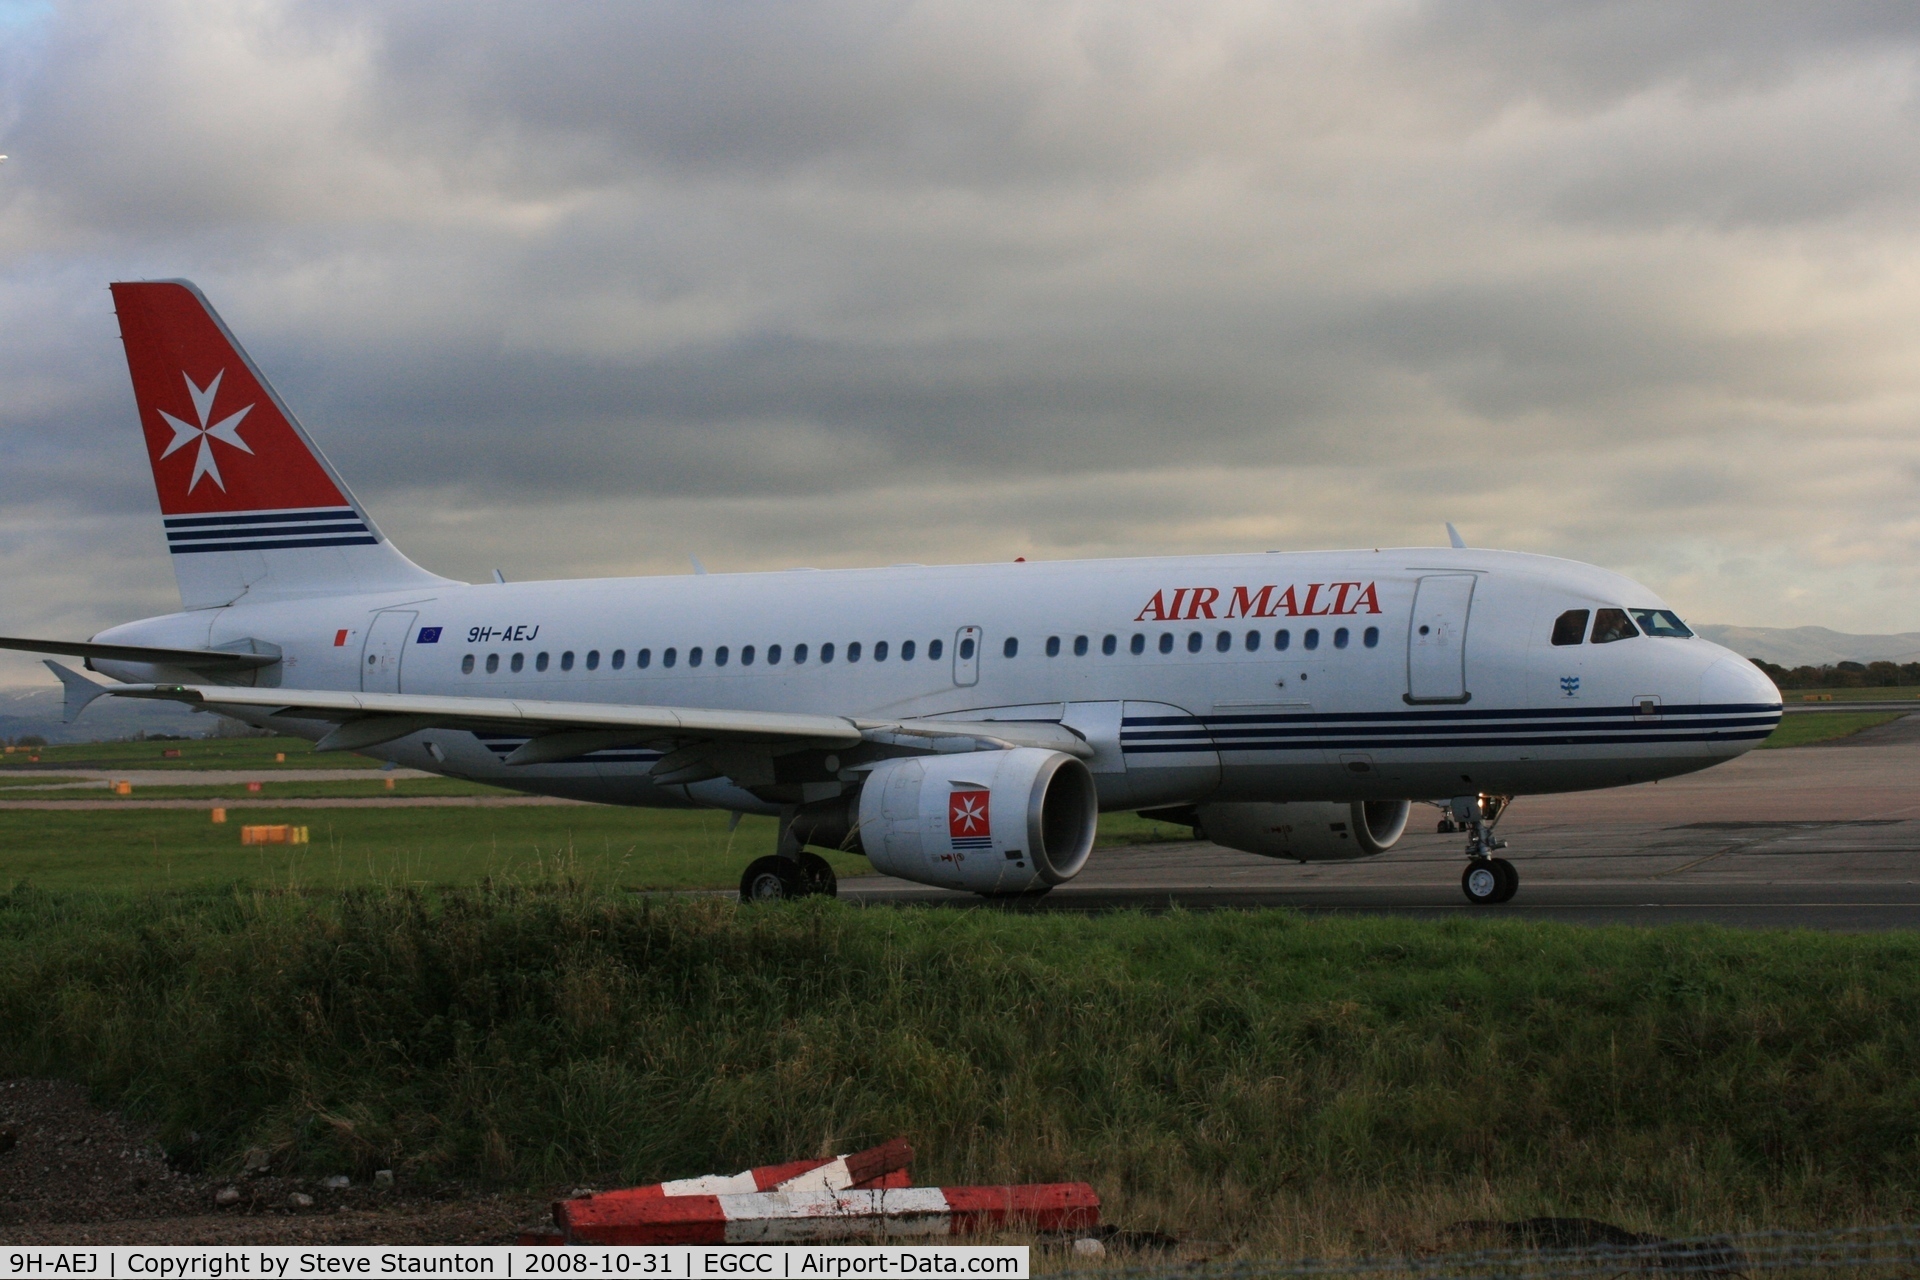 9H-AEJ, 2004 Airbus A319-112 C/N 2186, Taken at Manchester Airport, October 2008